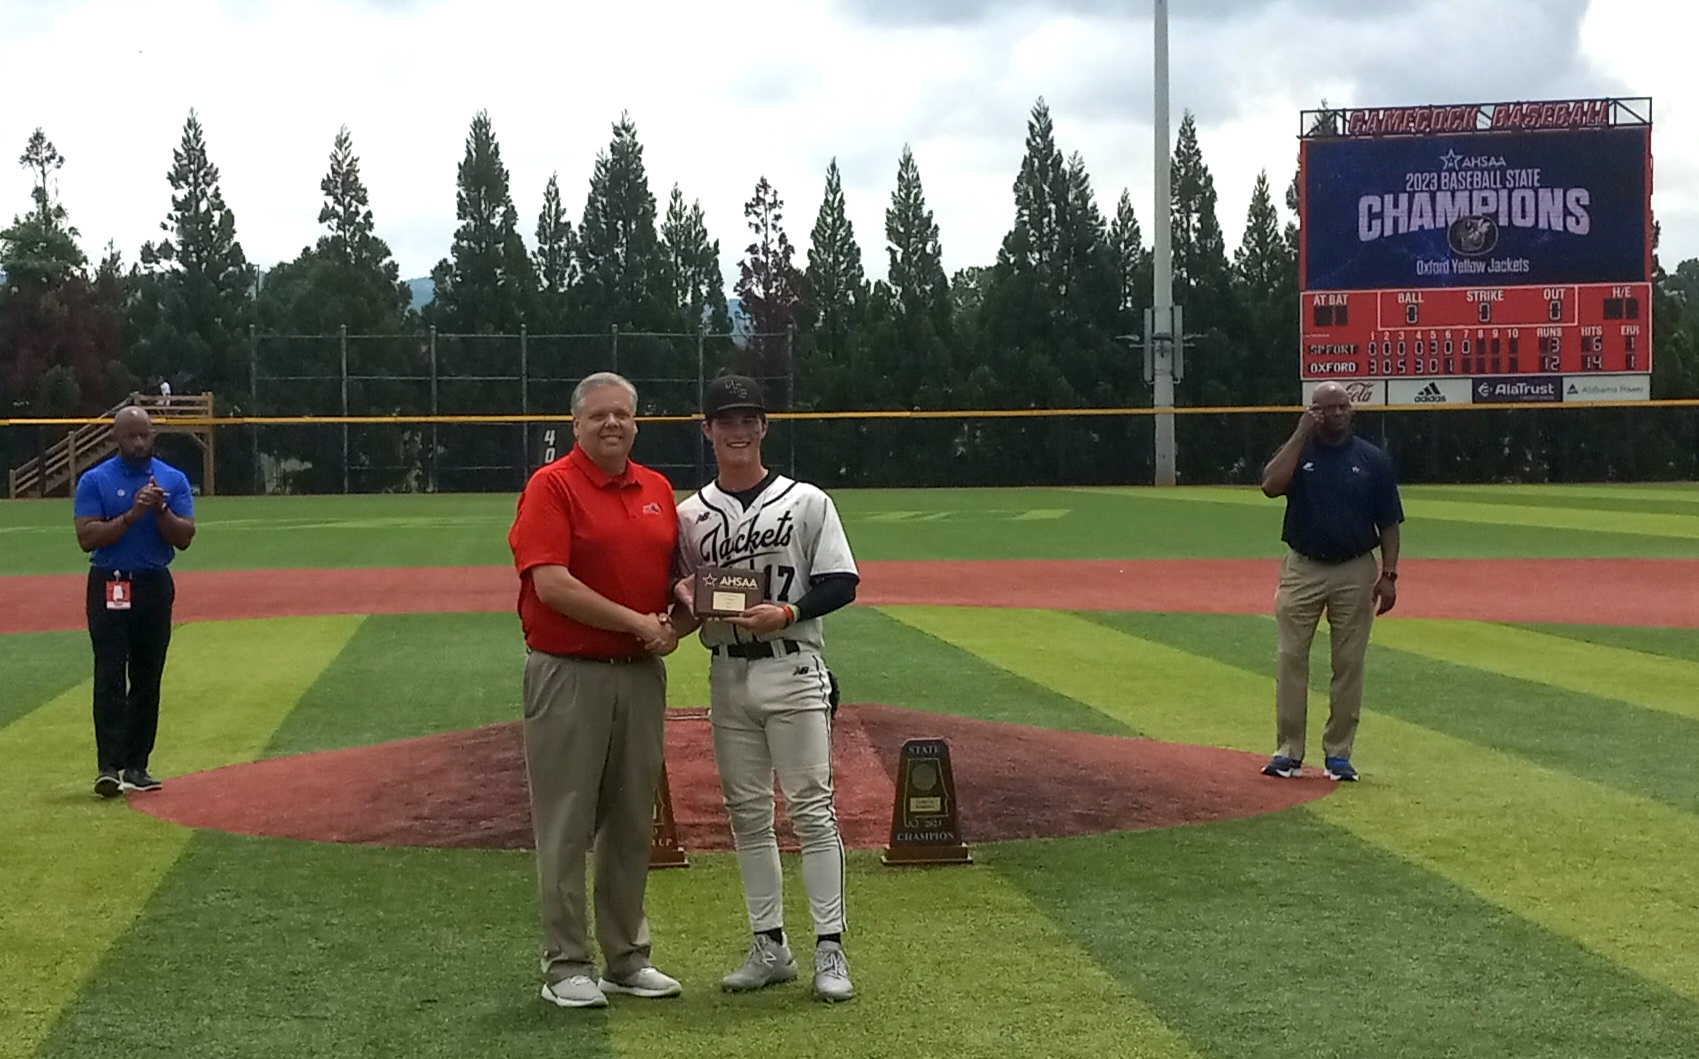 Oxford’s Hayes Harrison, most valuable player of the state tournament, is East Alabama Sports Today’s choice for Class 4A-6A All-Calhoun County player of the year in baseball. He batted .382 with a .497 on-base percentage and 38 RBIs. On the mound,he was 13-0 with an 0.13 ERA and 82 strikeouts. He was the winning pitcher in the county final, against Alexandria. (Photo by Joe Medley)